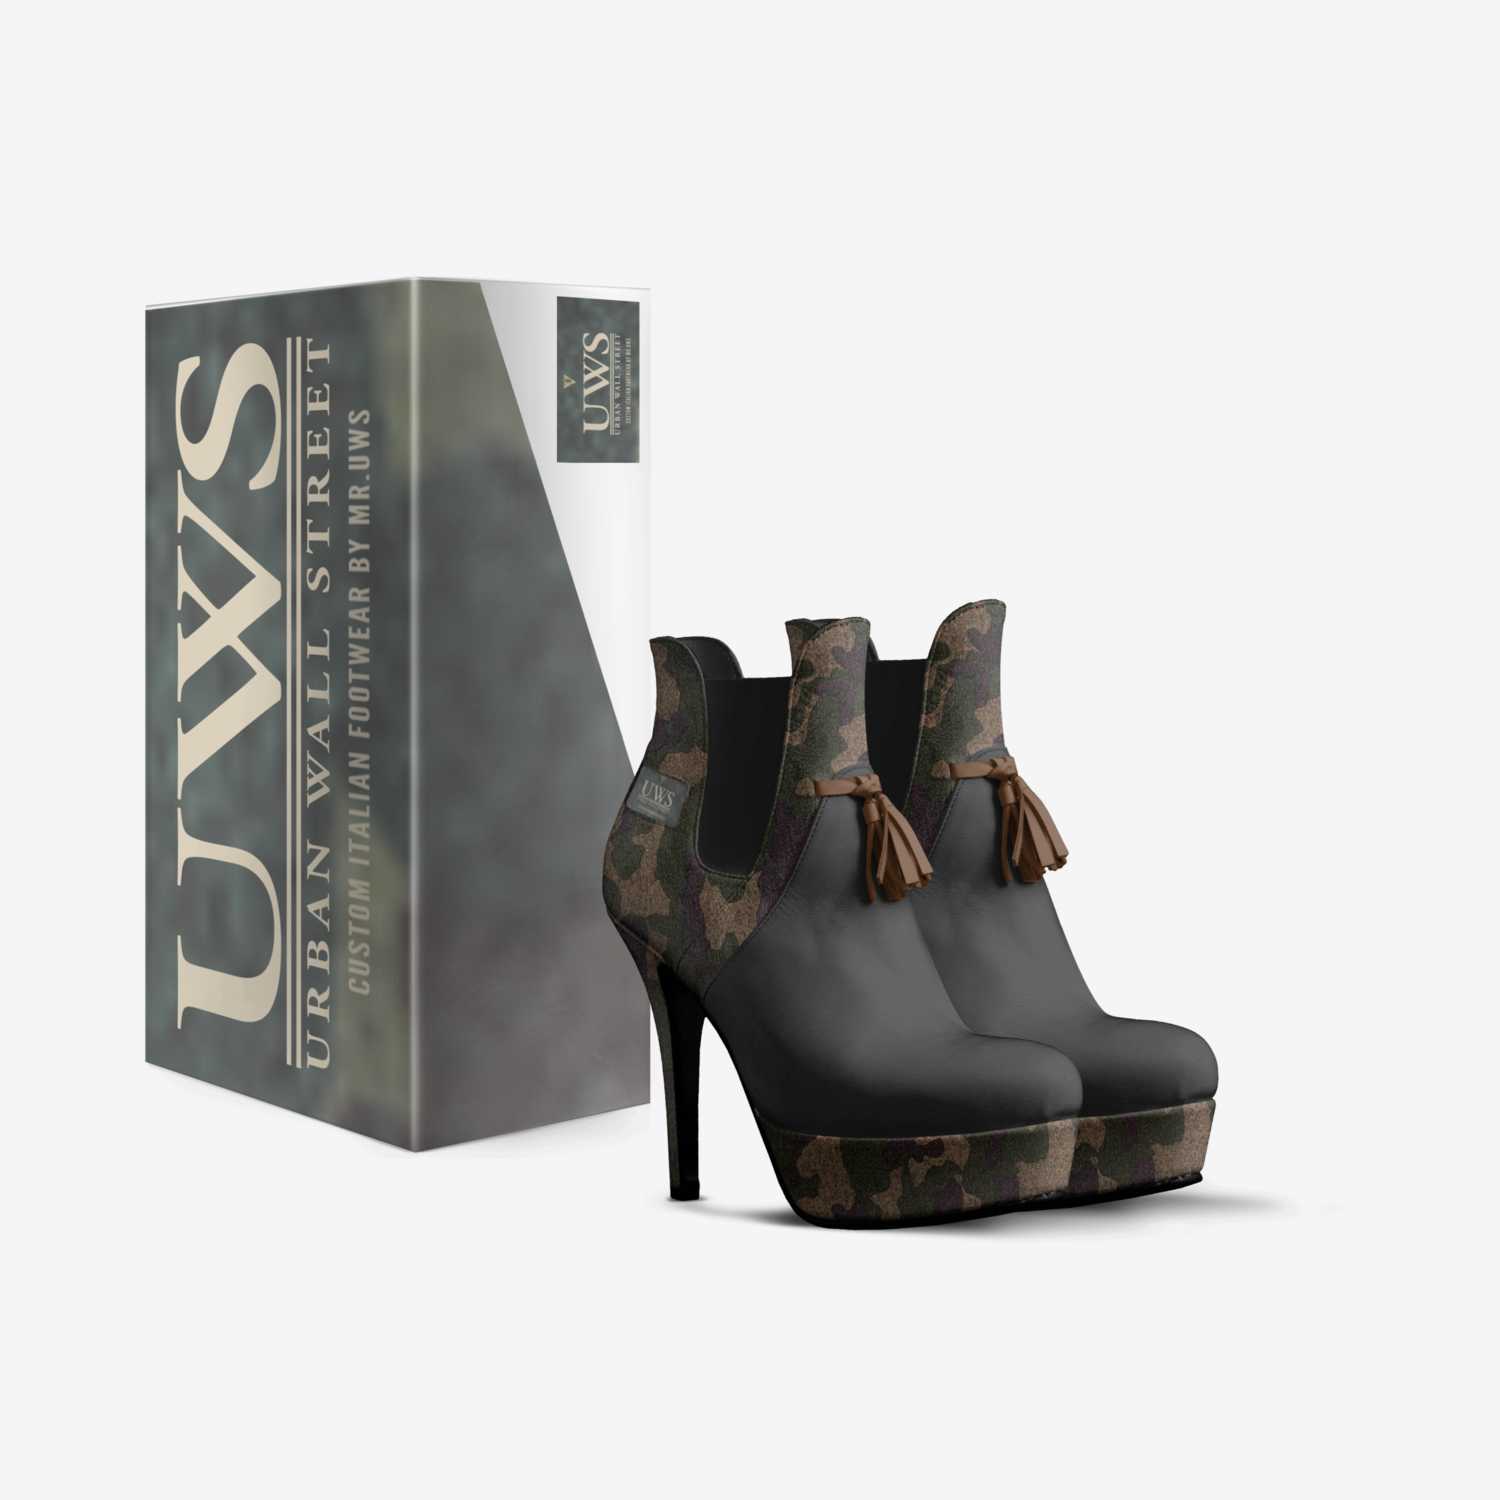 Camo Chic custom made in Italy shoes by Urbanwallstreet Earl | Box view